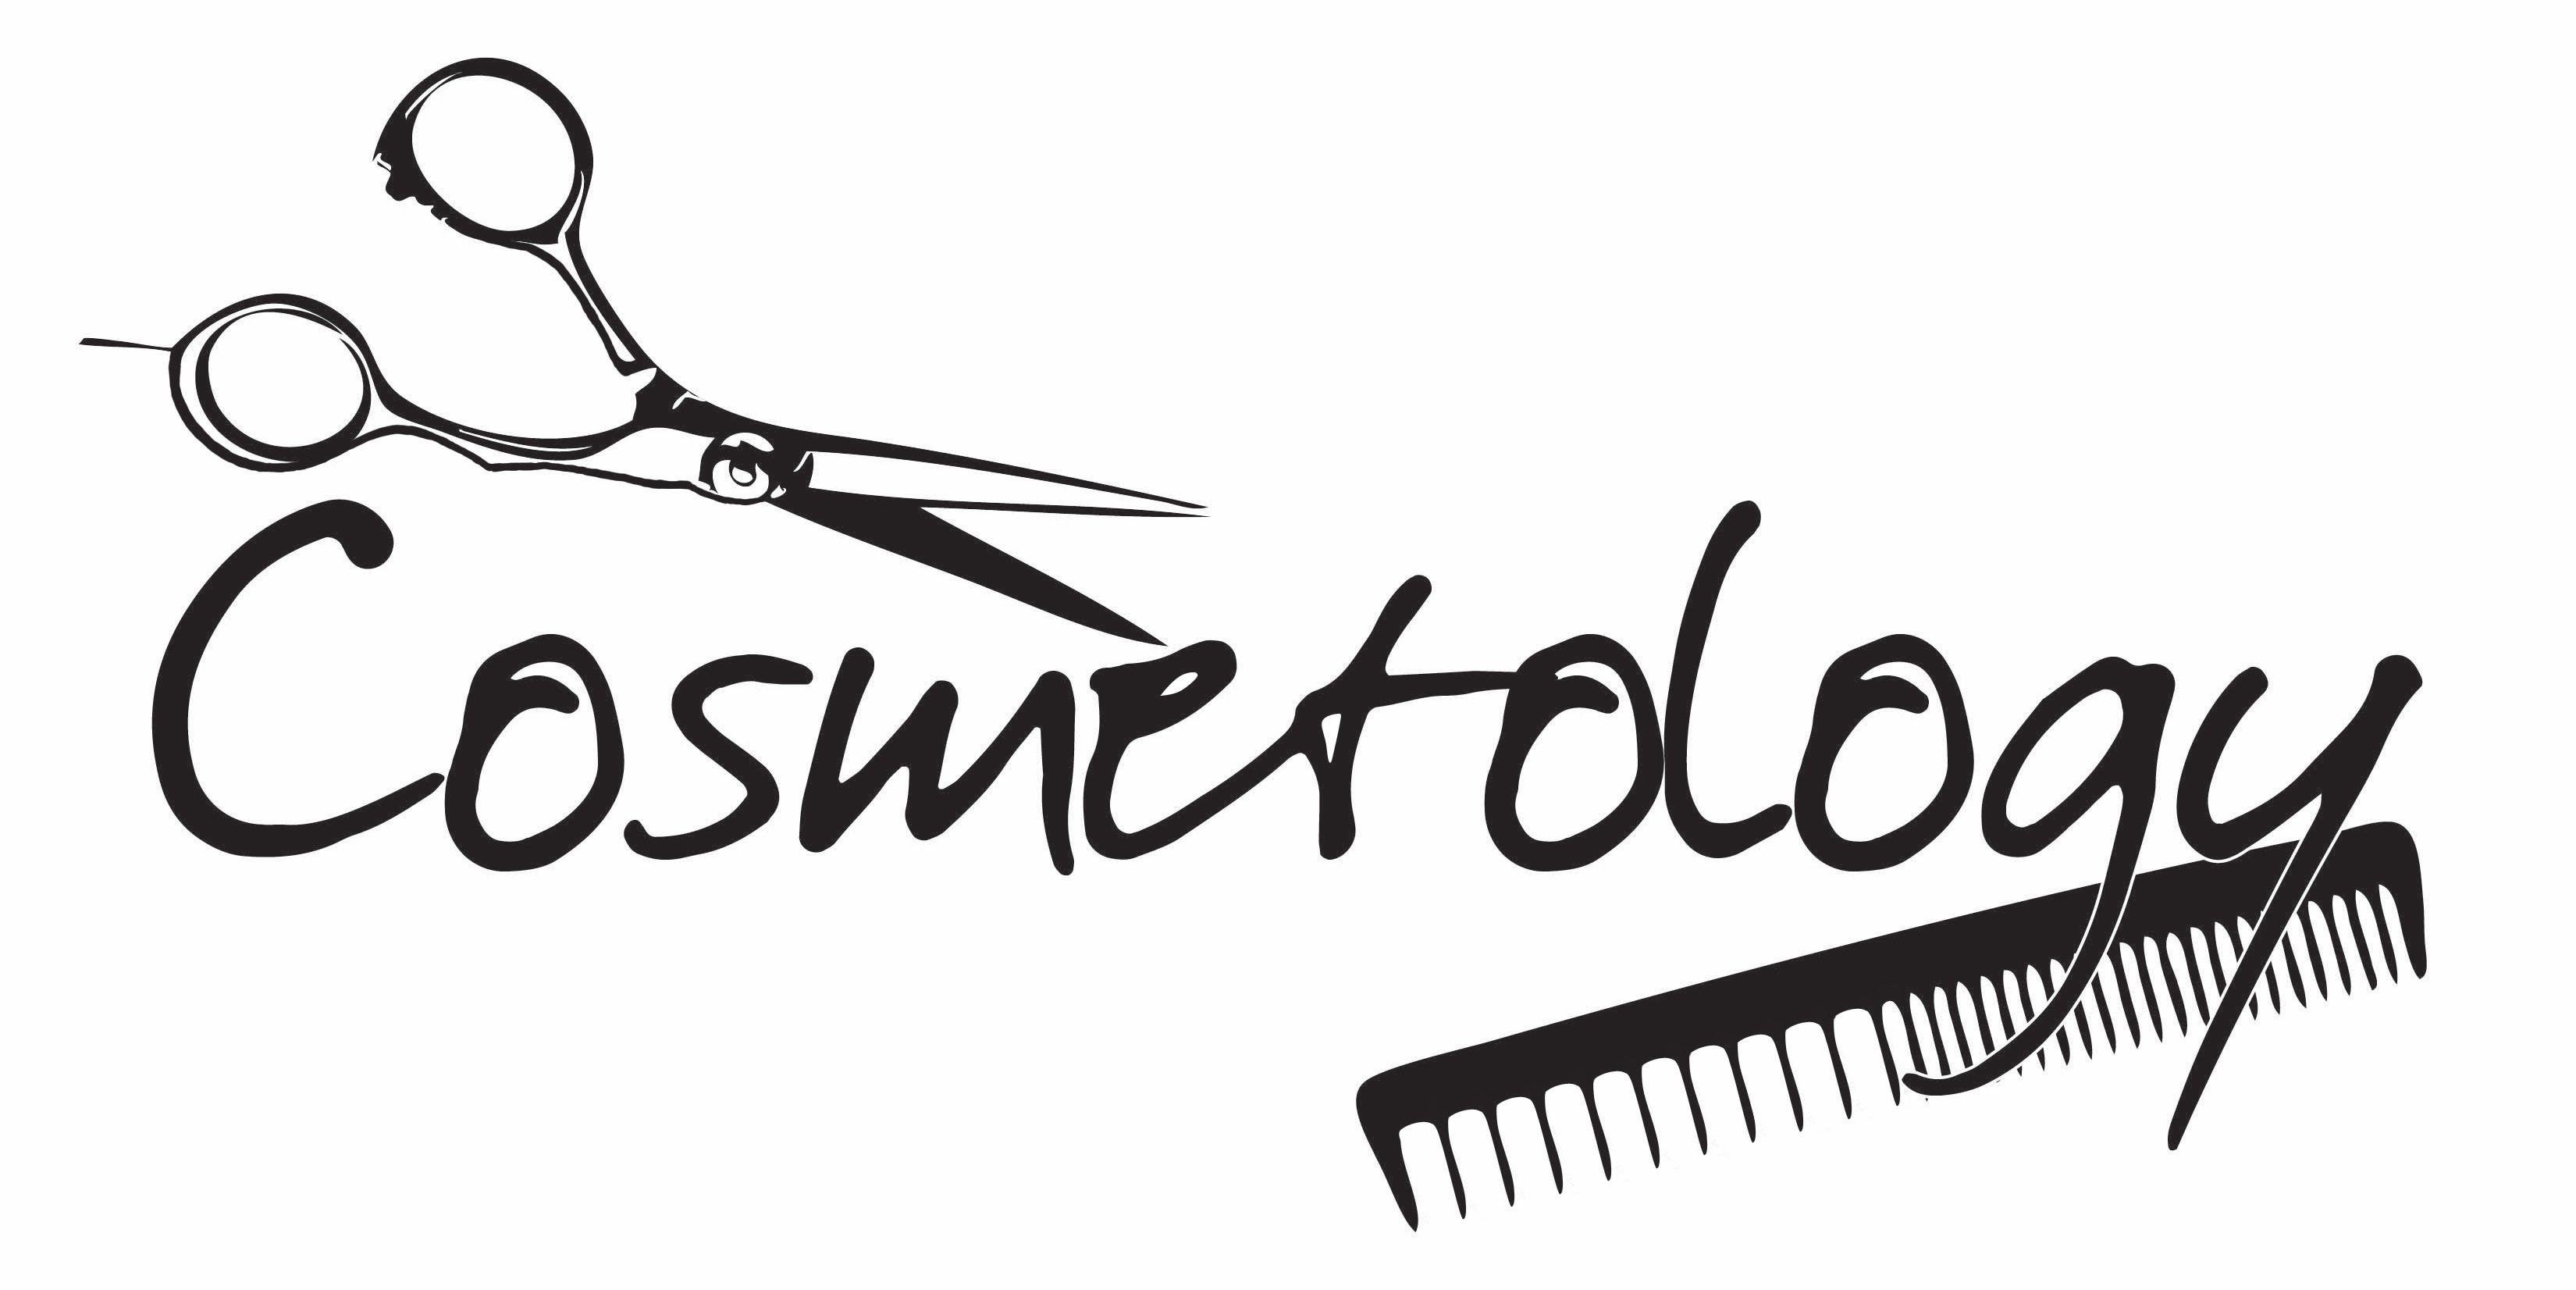 Cosmetologist Logo - What is Cosmetology? Which colleges offer this Course and what types ...